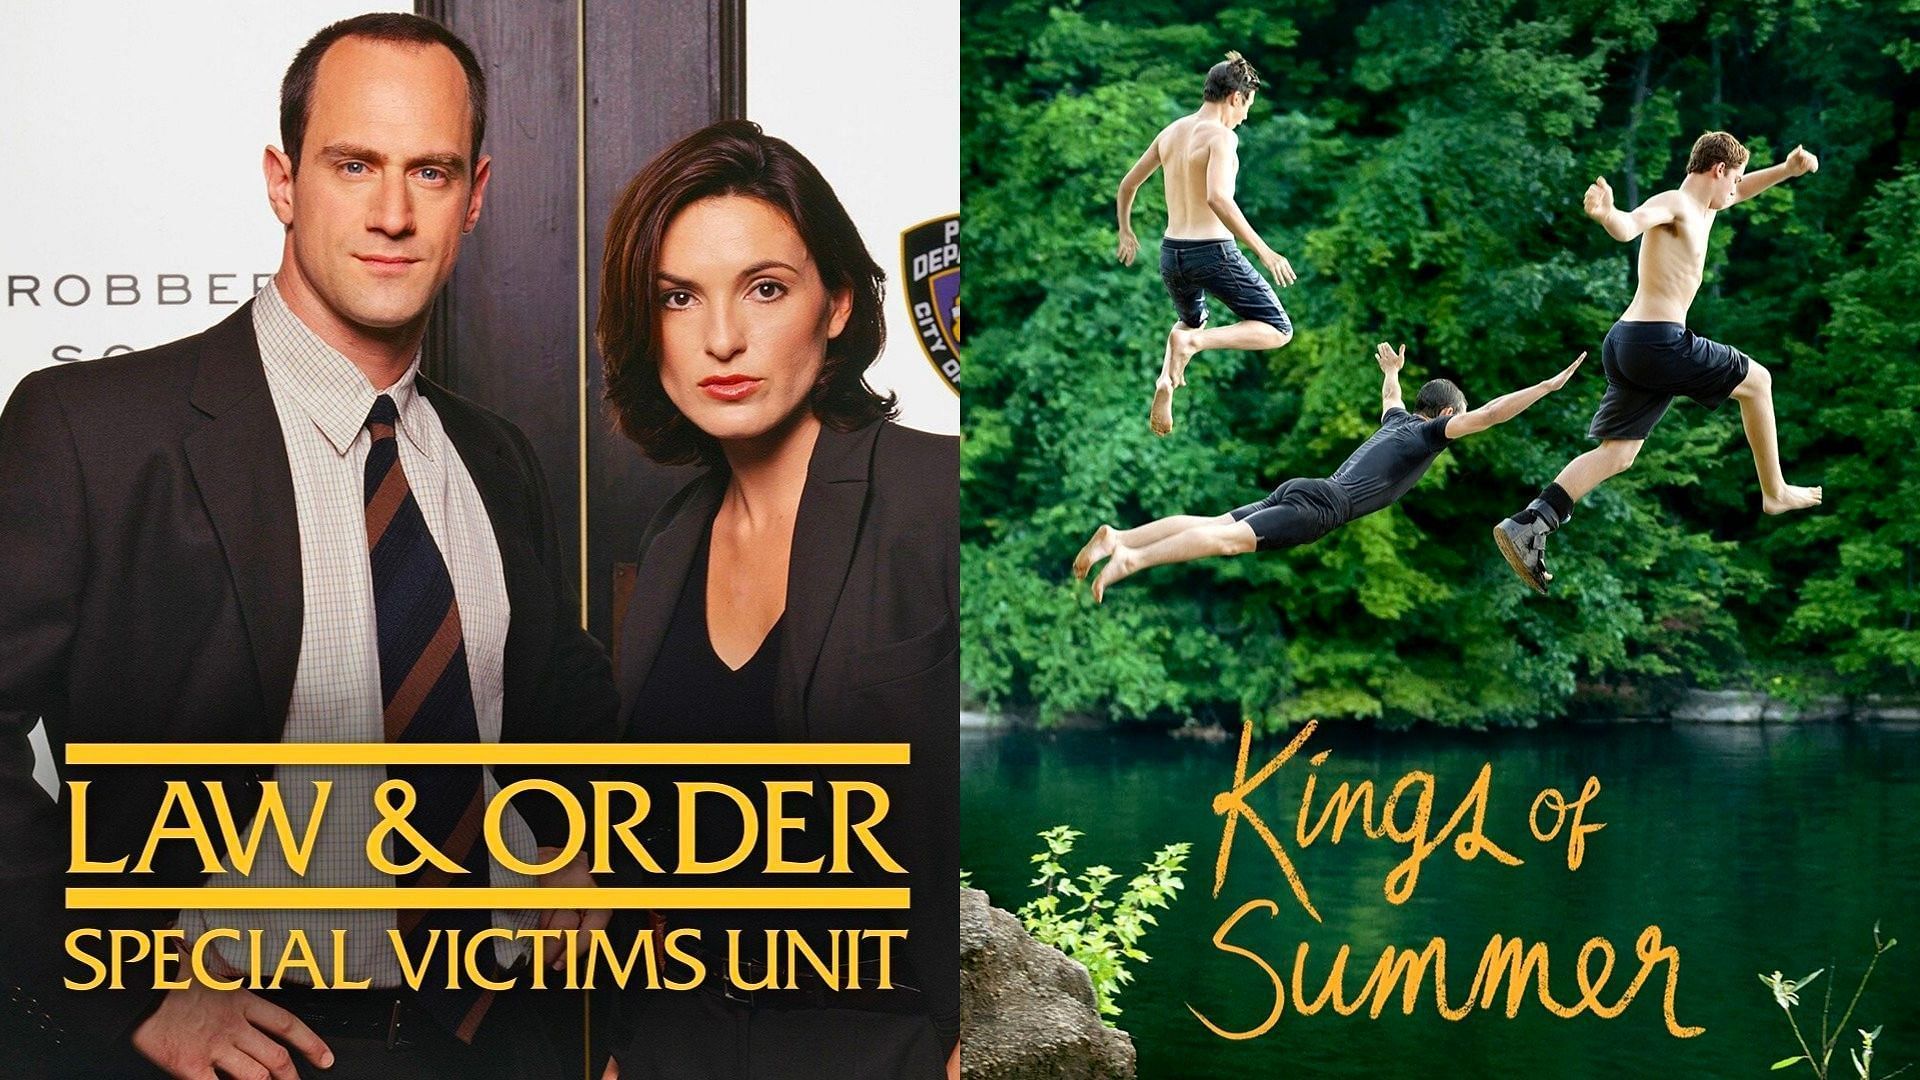 Erin has starred in (L) Law &amp; Order: Special Victims Unit and (R) The Kings of Summer (Images via IMDb)